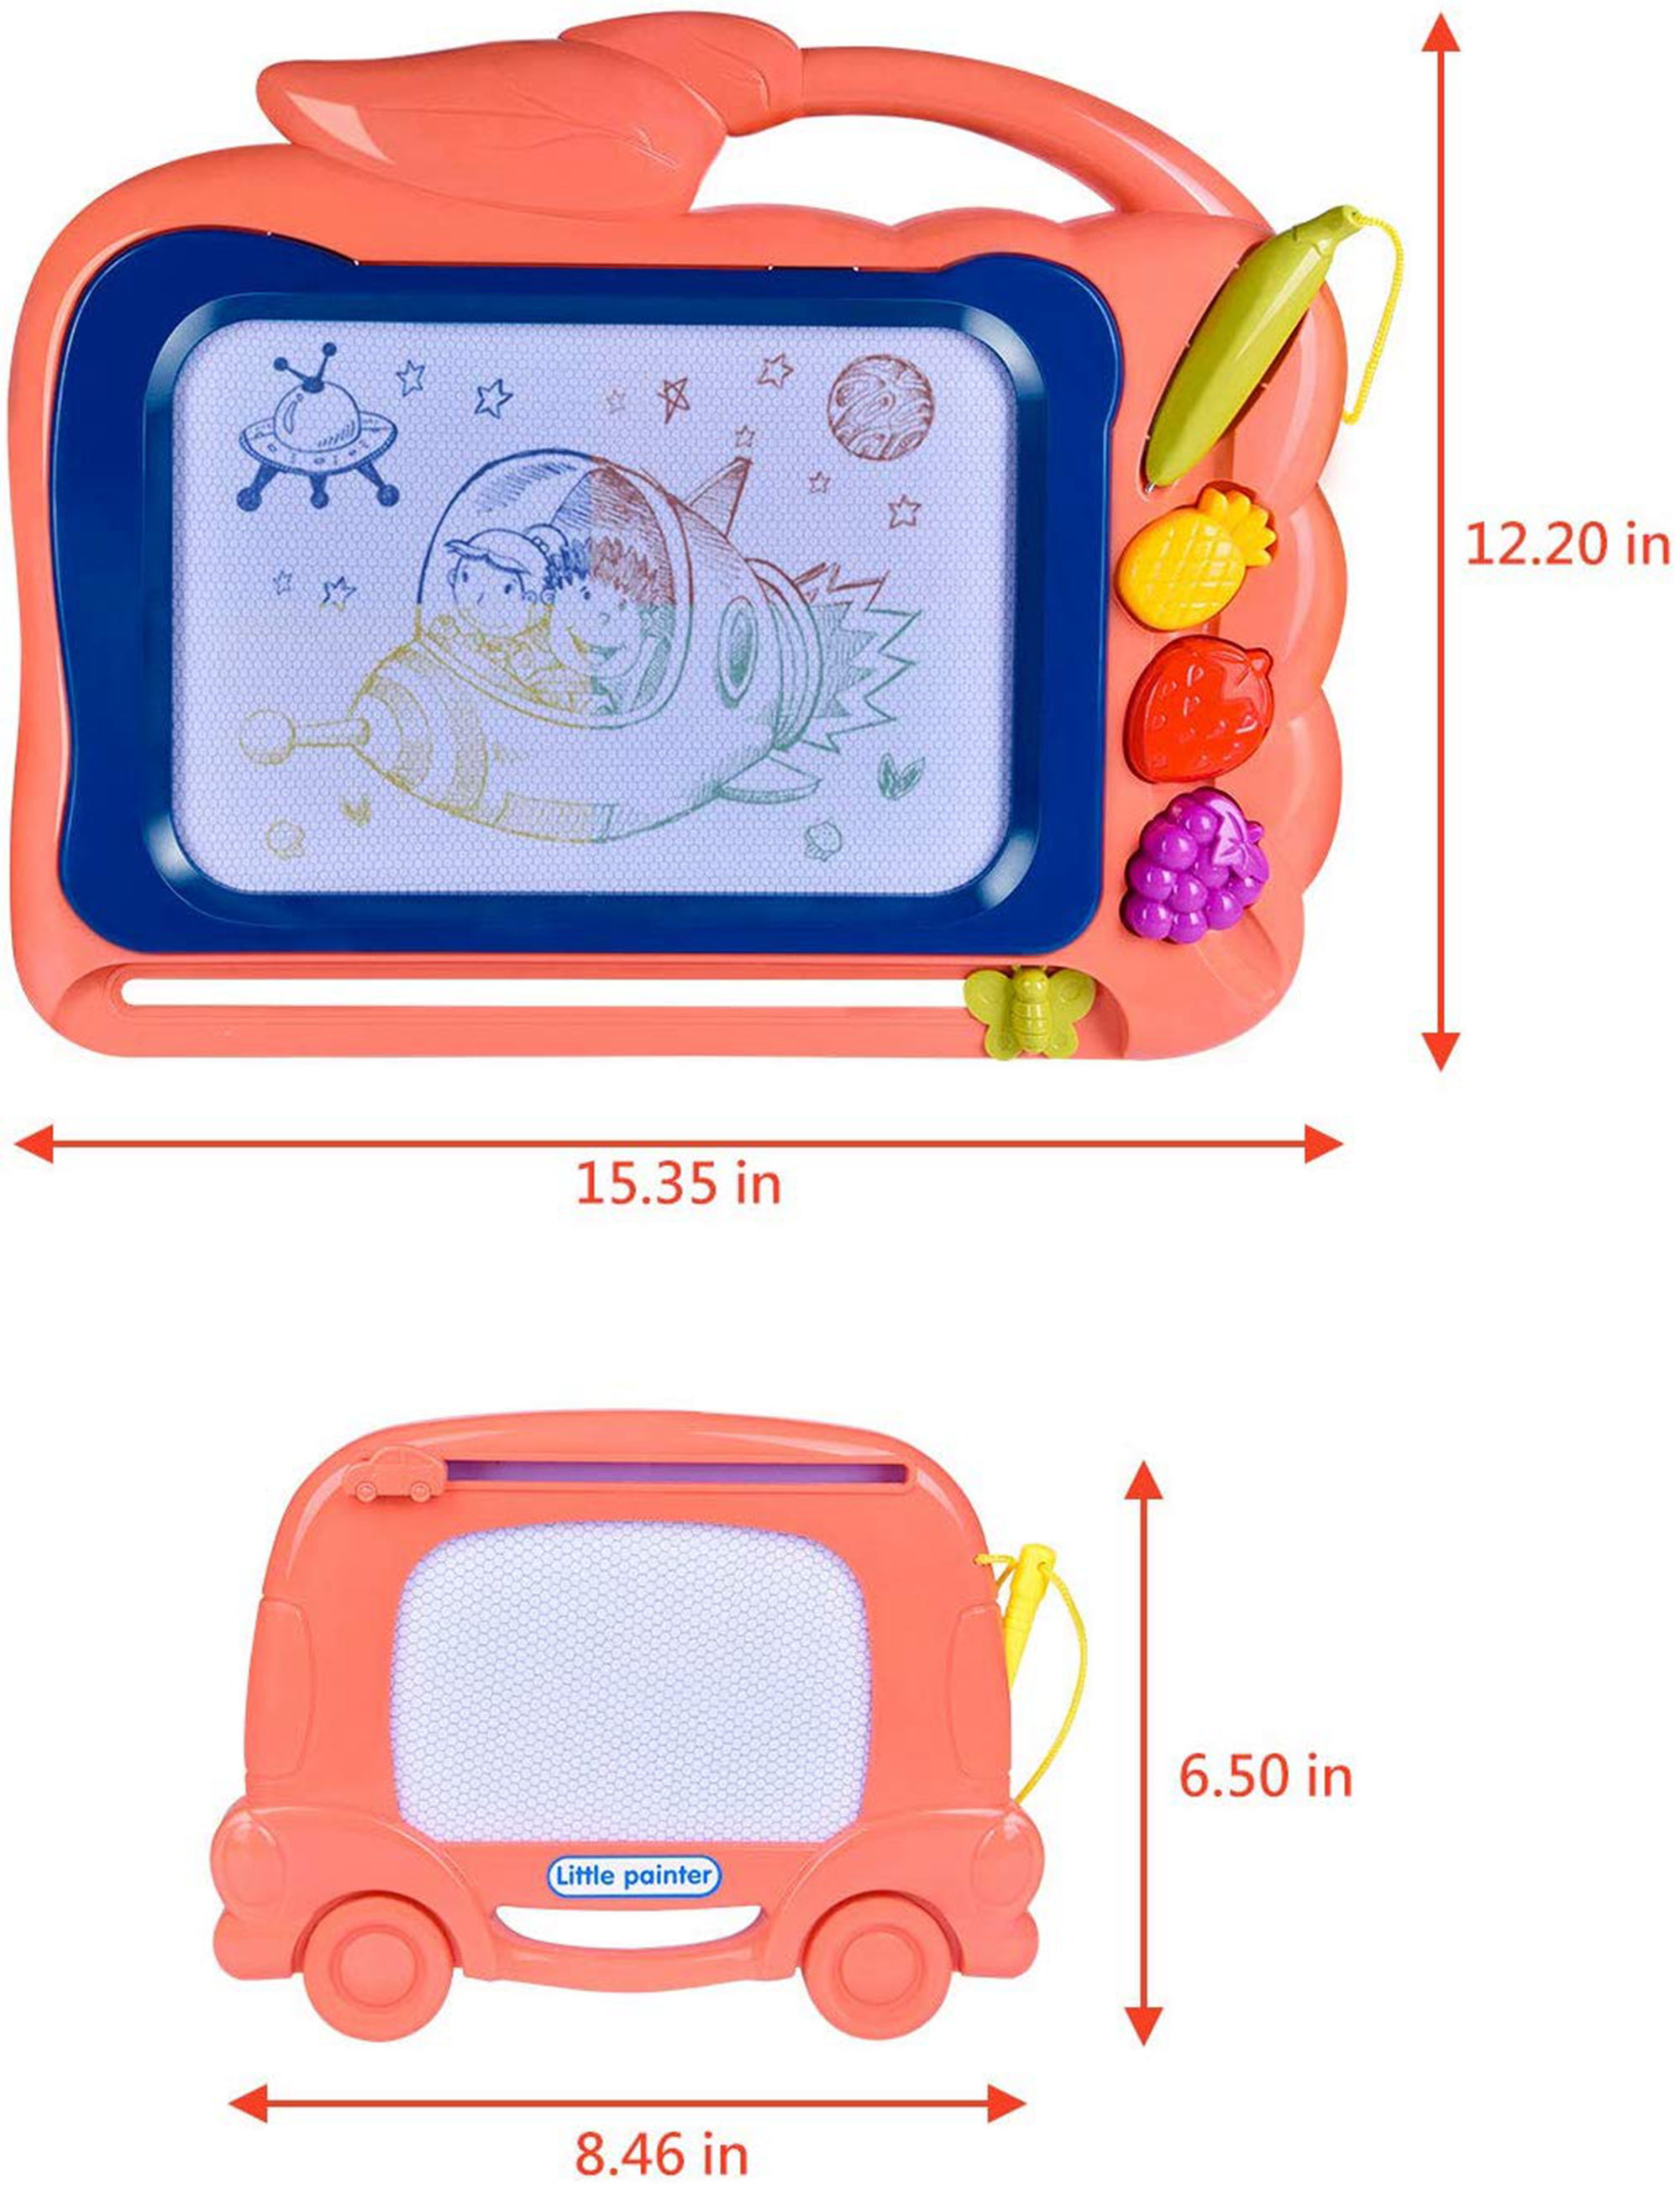 Playkidz 2 pack Color Doodler Magnetic Drawing Board Toy for Kids, Large  Doodle Board Writing Painting Sketch Pad, Write and Play, Draw and Stamp